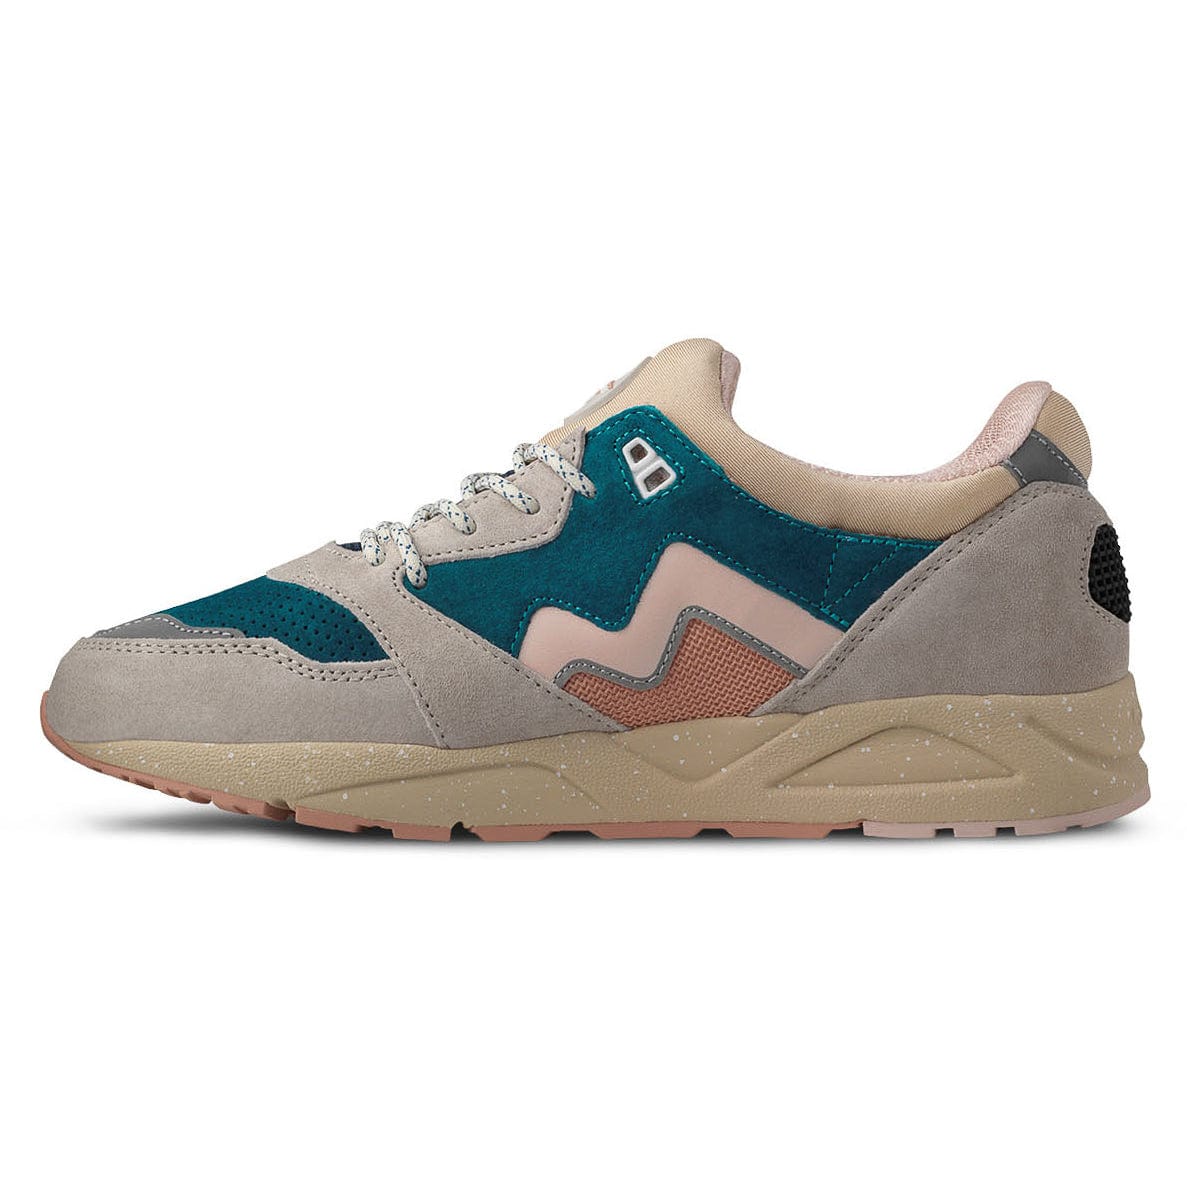 Aria 95 in silver lining and peach whip - Karhu - State Of Flux